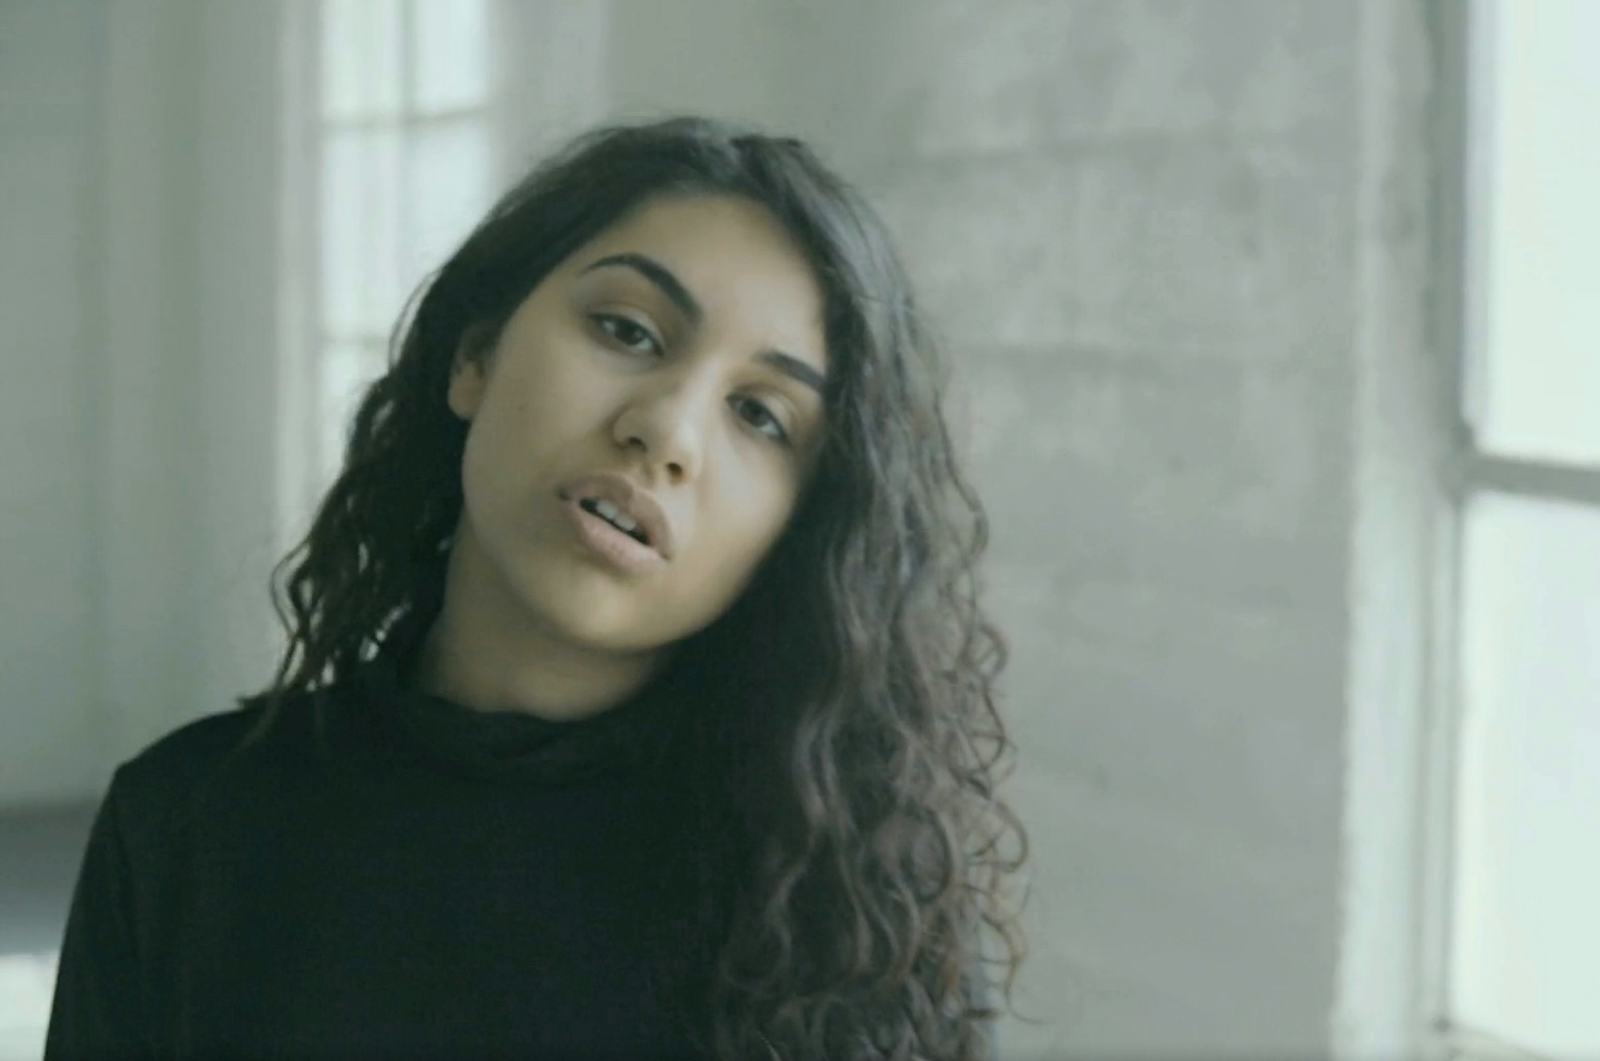 Alessia cara scars to your. Scar to your beautiful s Song. Your beautiful.